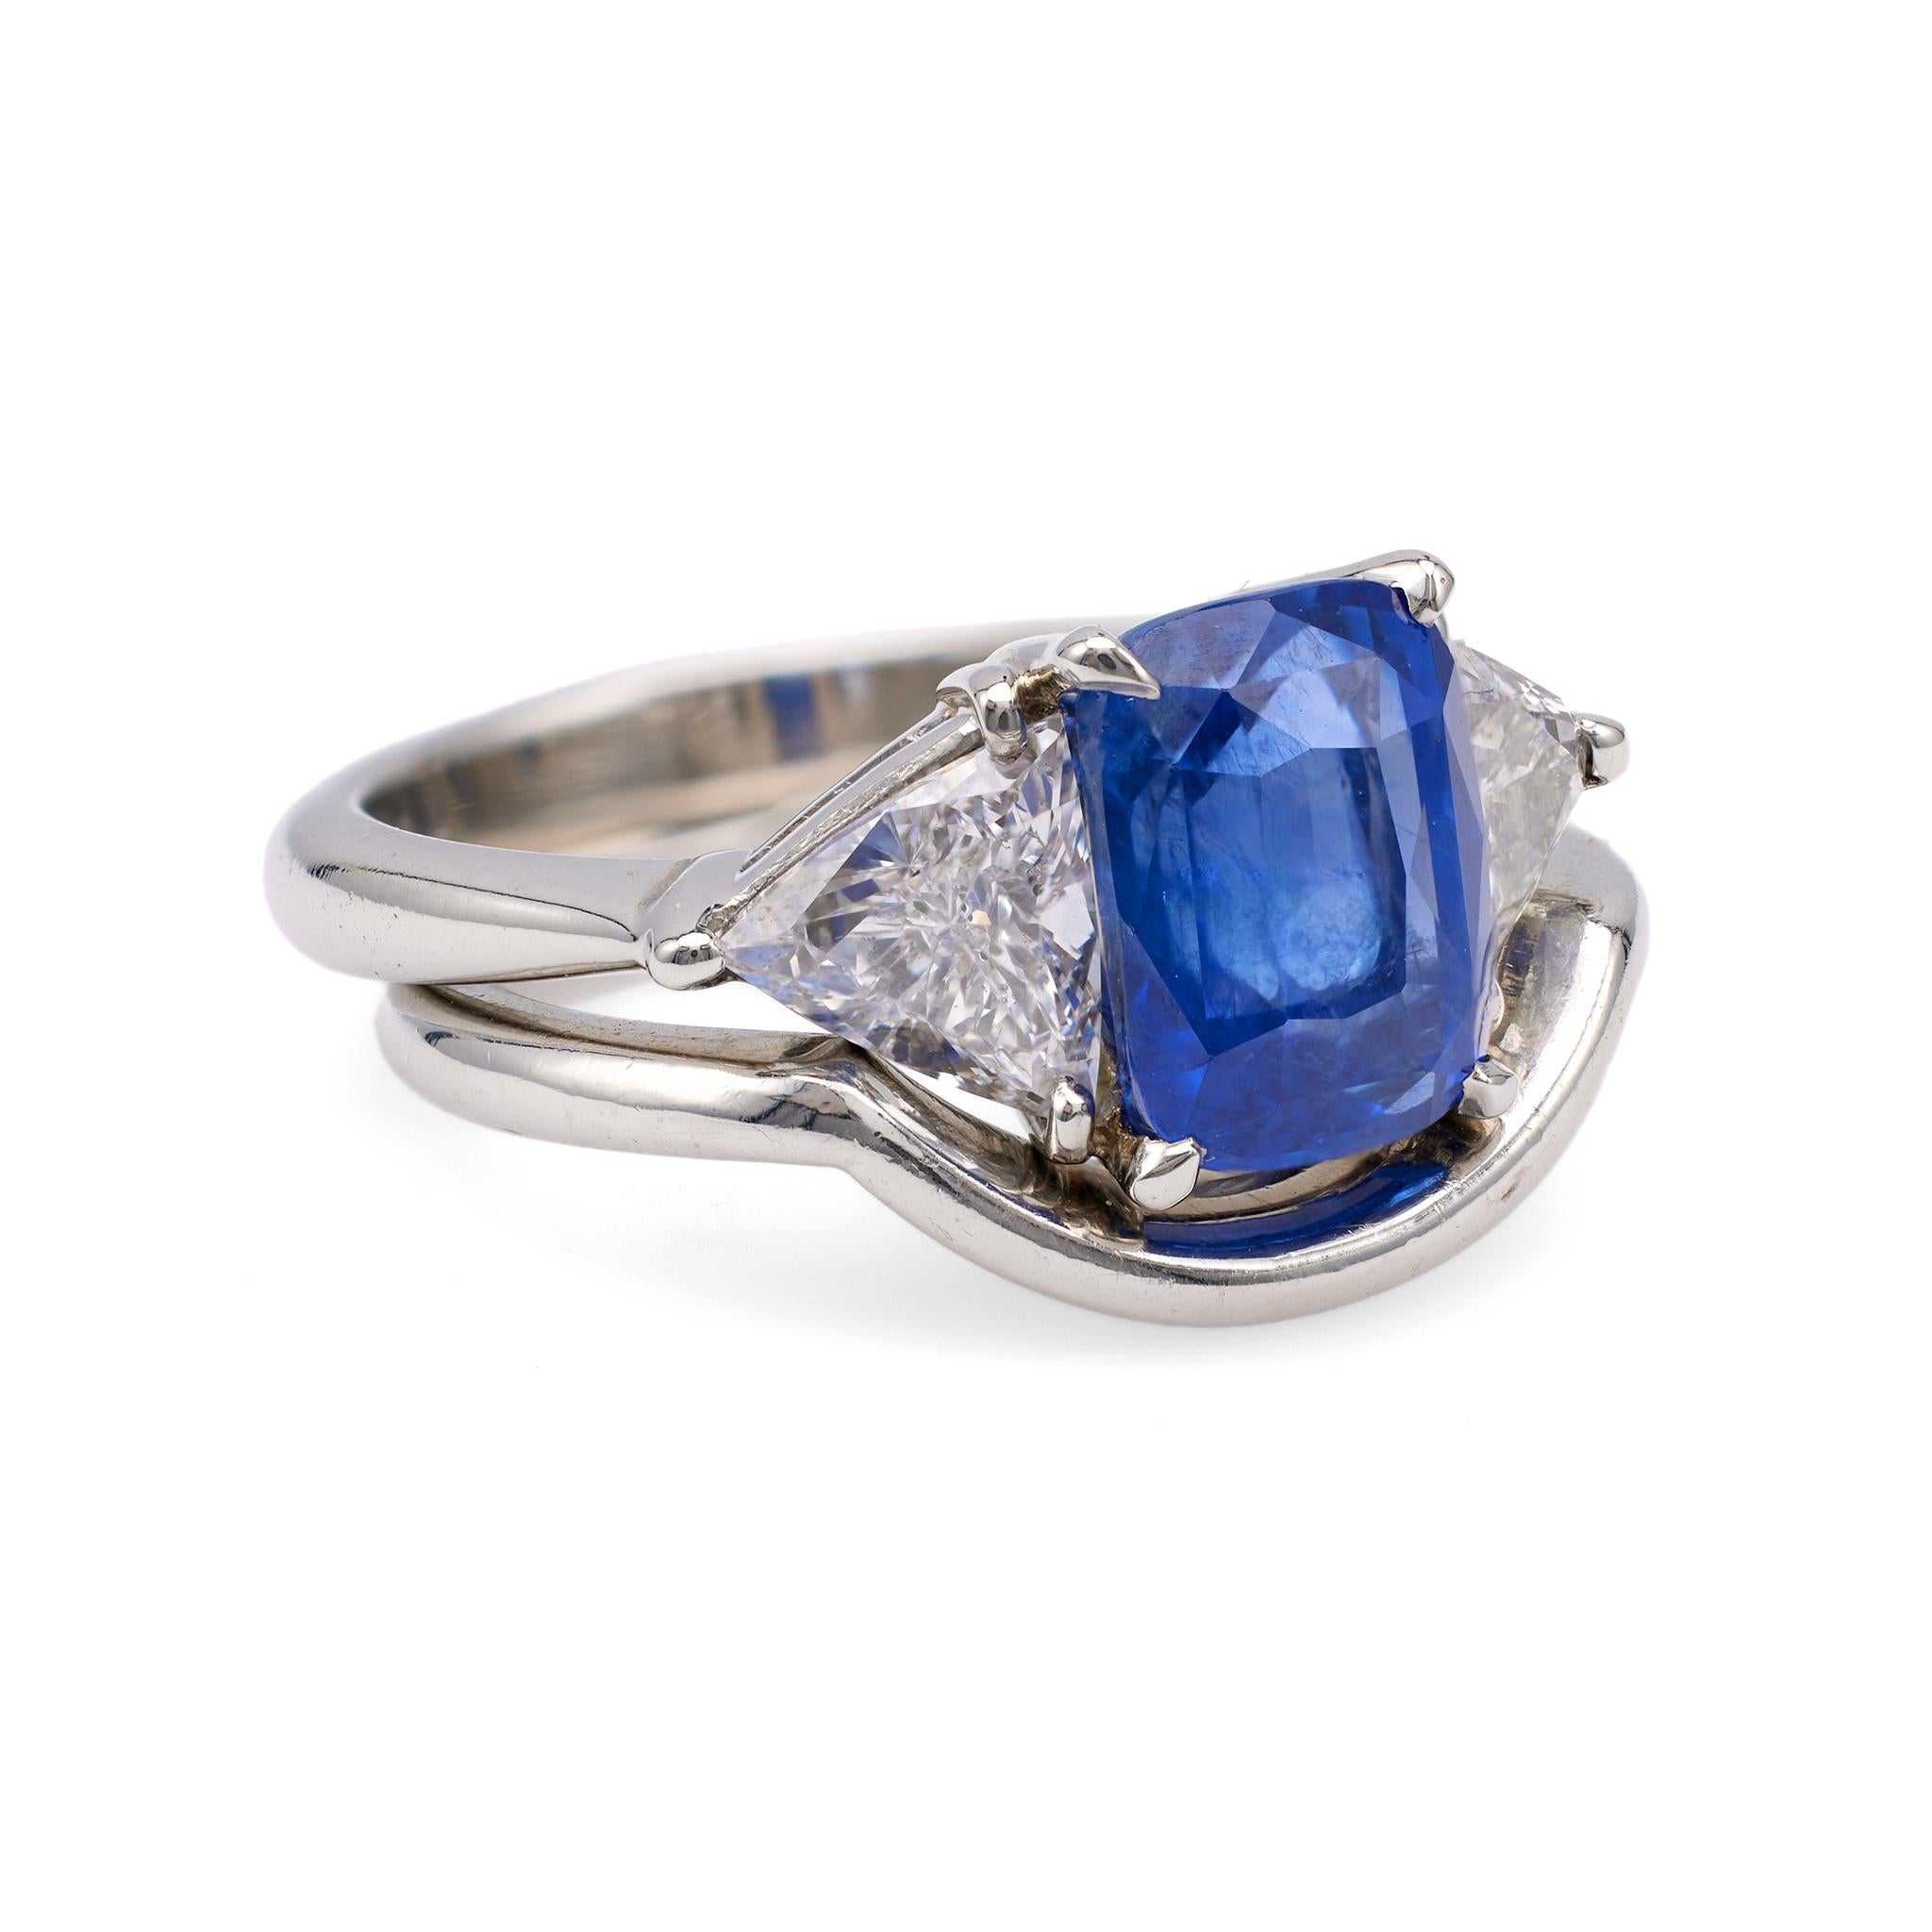 Vintage GIA 2.66 Carat Ceylon Sapphire Diamond Platinum Ring Set In Good Condition For Sale In Beverly Hills, CA